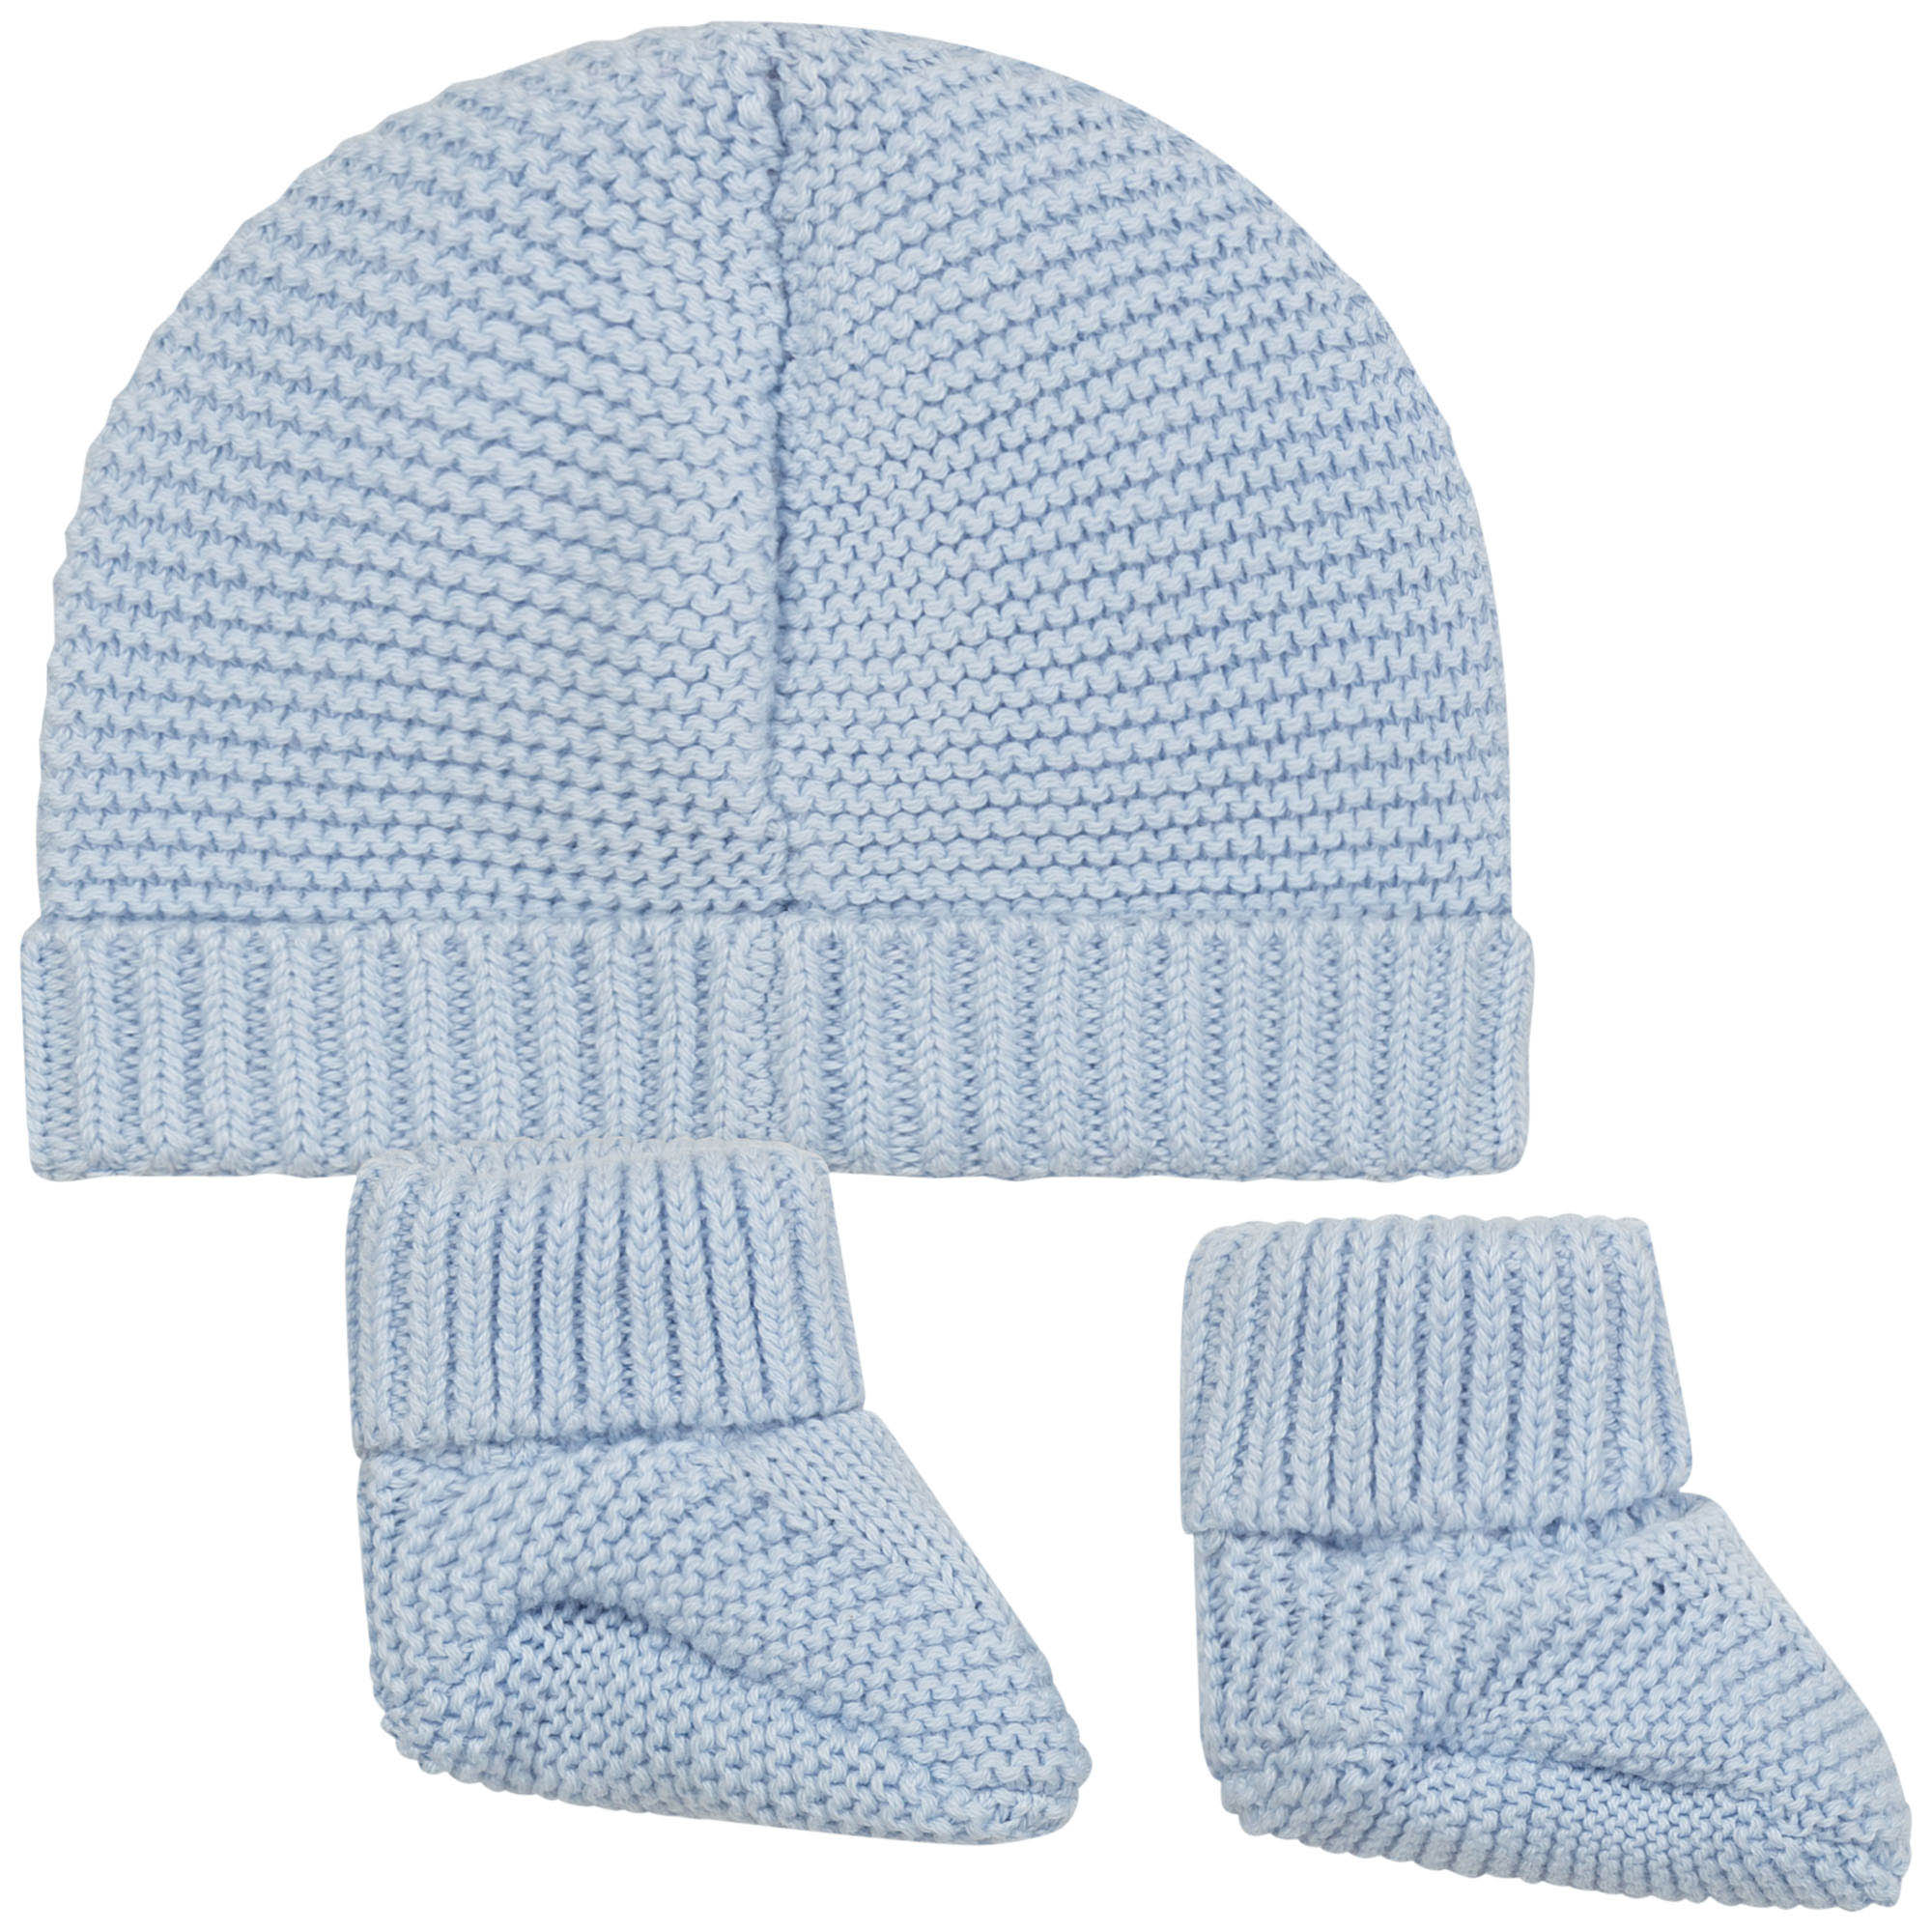 Tricot hat and booties set CARREMENT BEAU for BOY